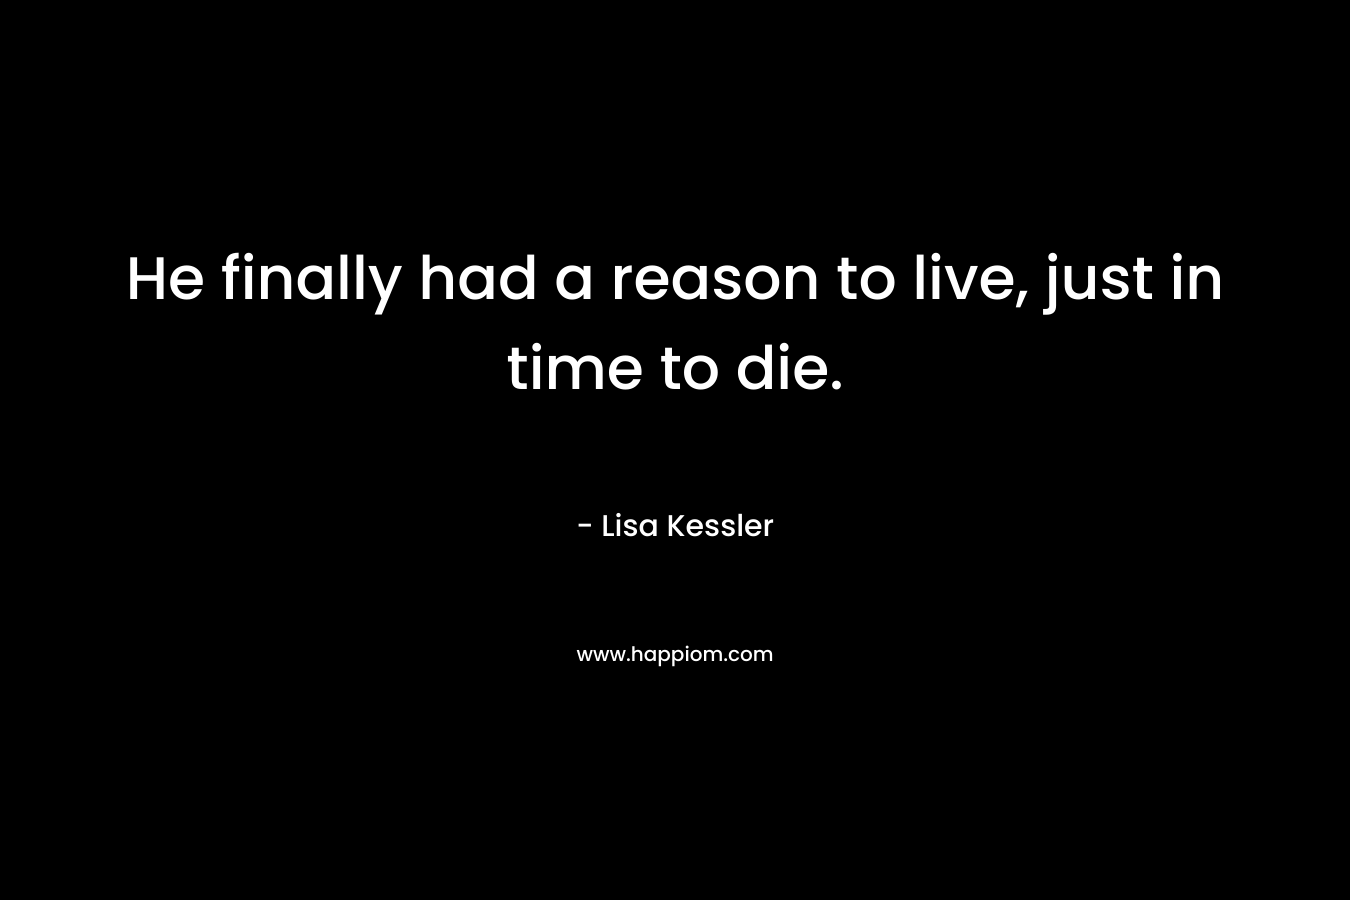 He finally had a reason to live, just in time to die. – Lisa Kessler